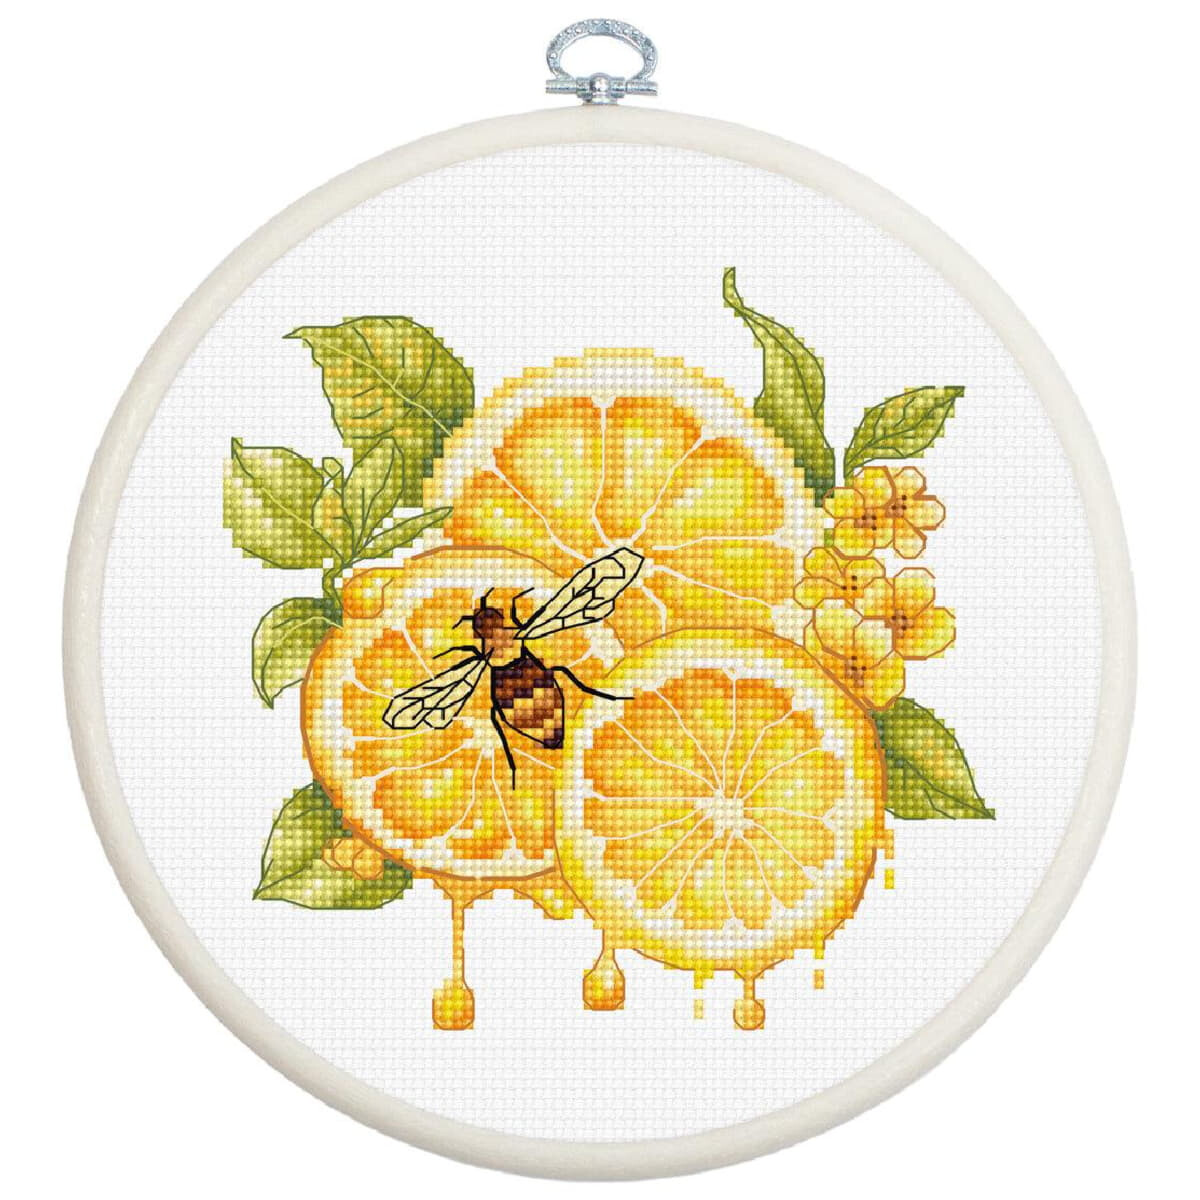 An embroidery pack from Luca-s frames a cross stitch...